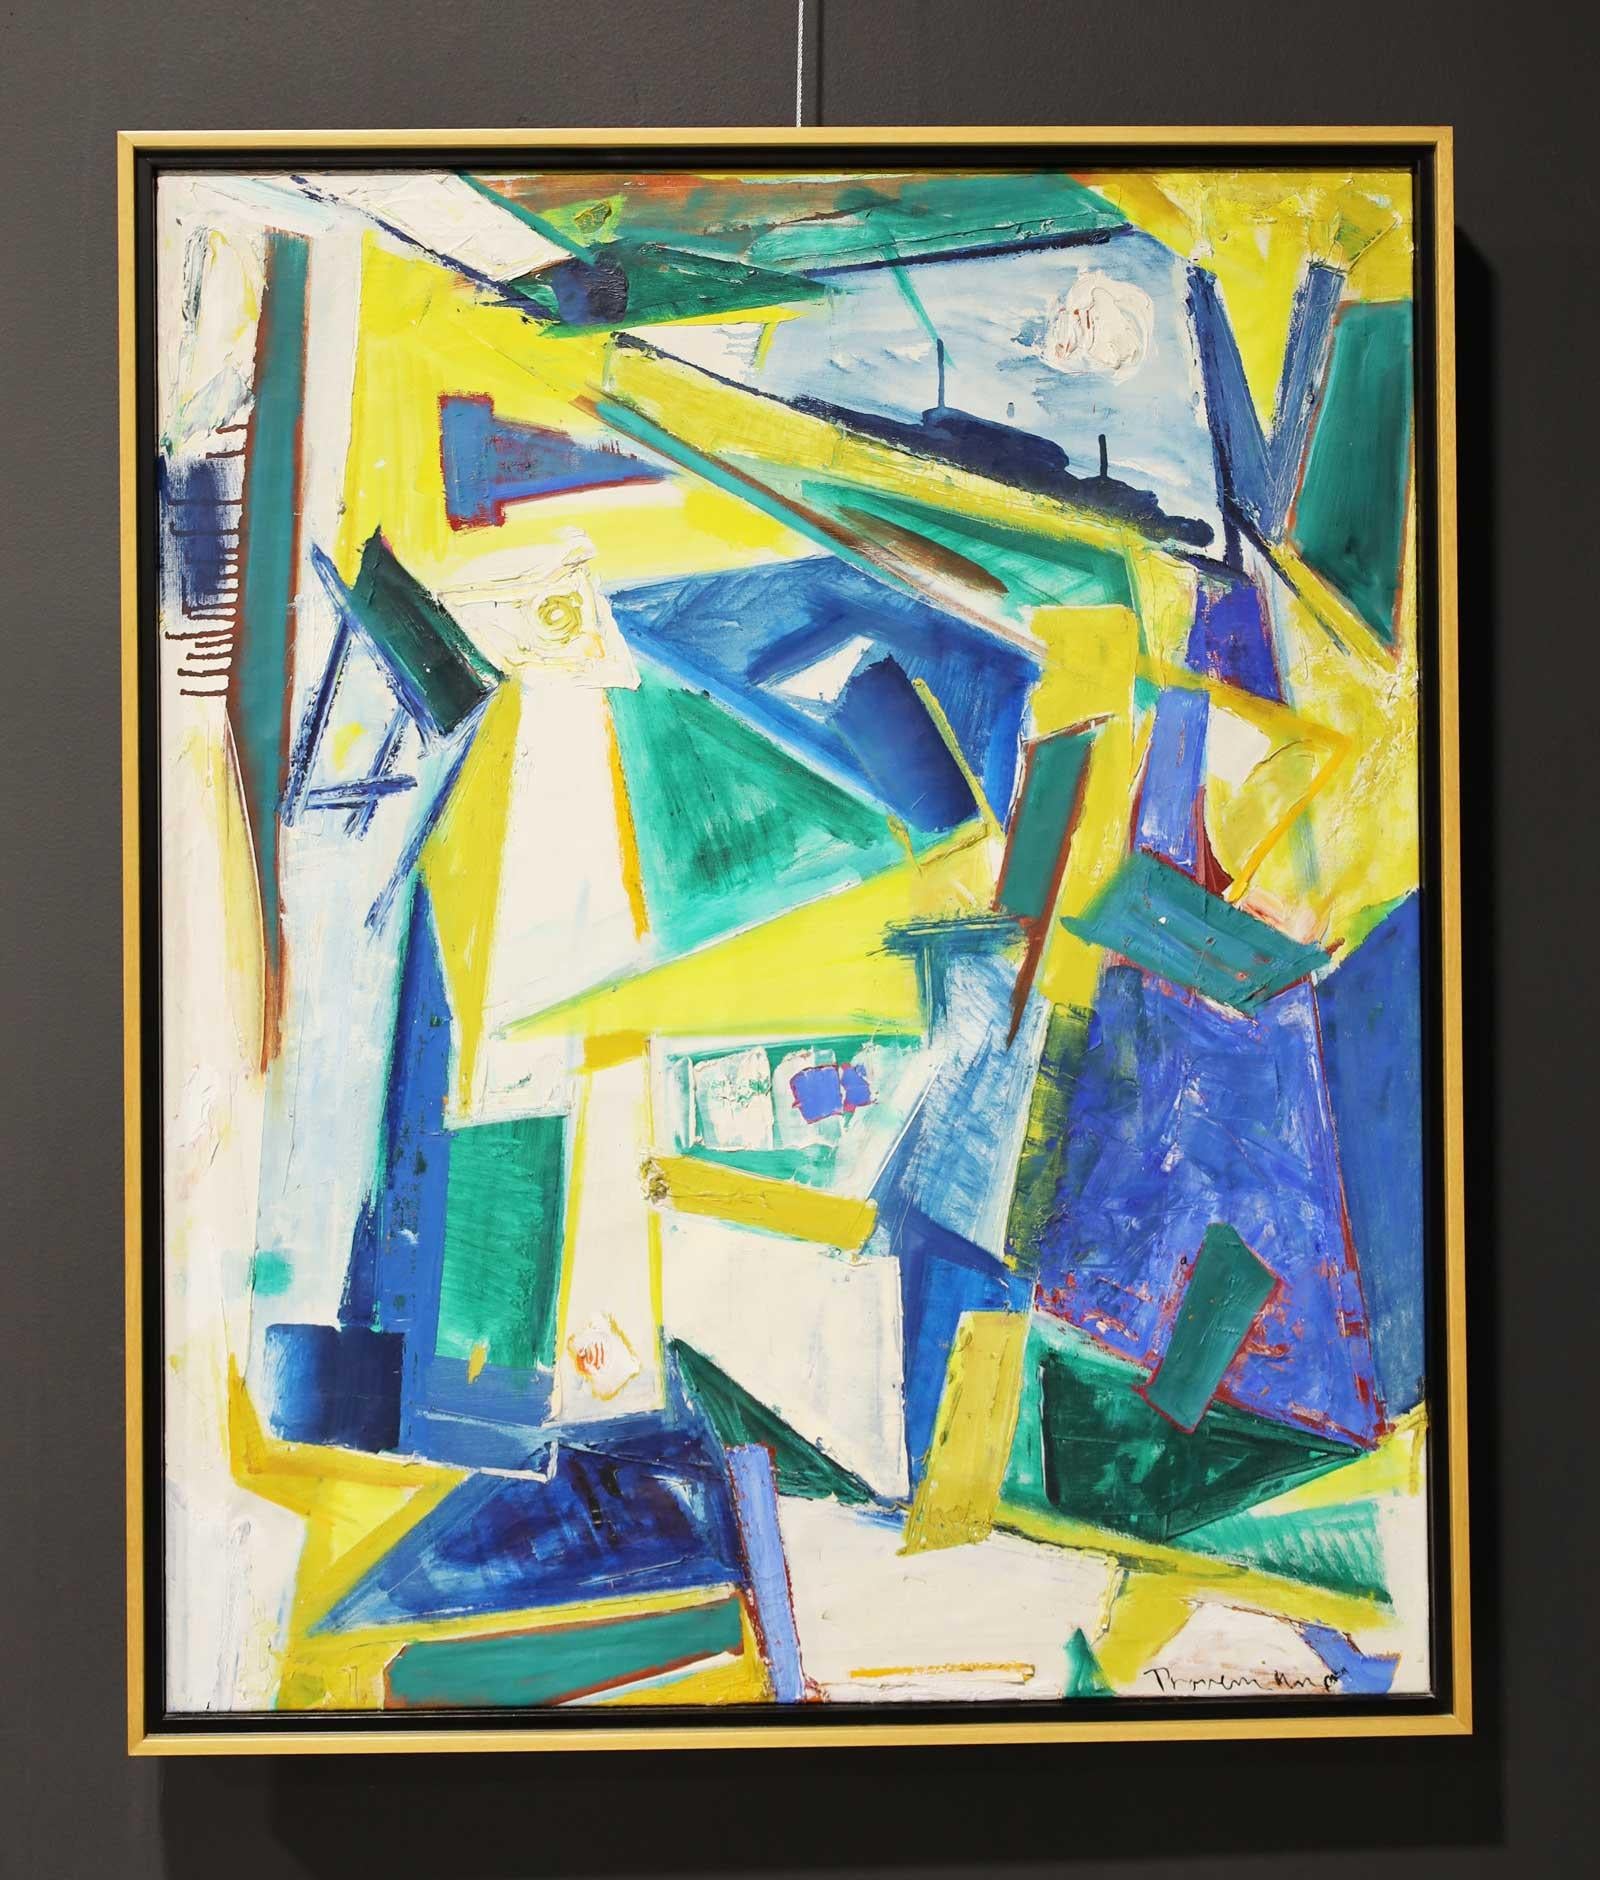 Abstract expressionist painting with geometric color fields of yellow, blue, white, and green. 
Signed along the lower right. 

Provenzano (American, 1923-1999) was a student of Hans Hoffmann (1880-1966), a key player in the Abstract